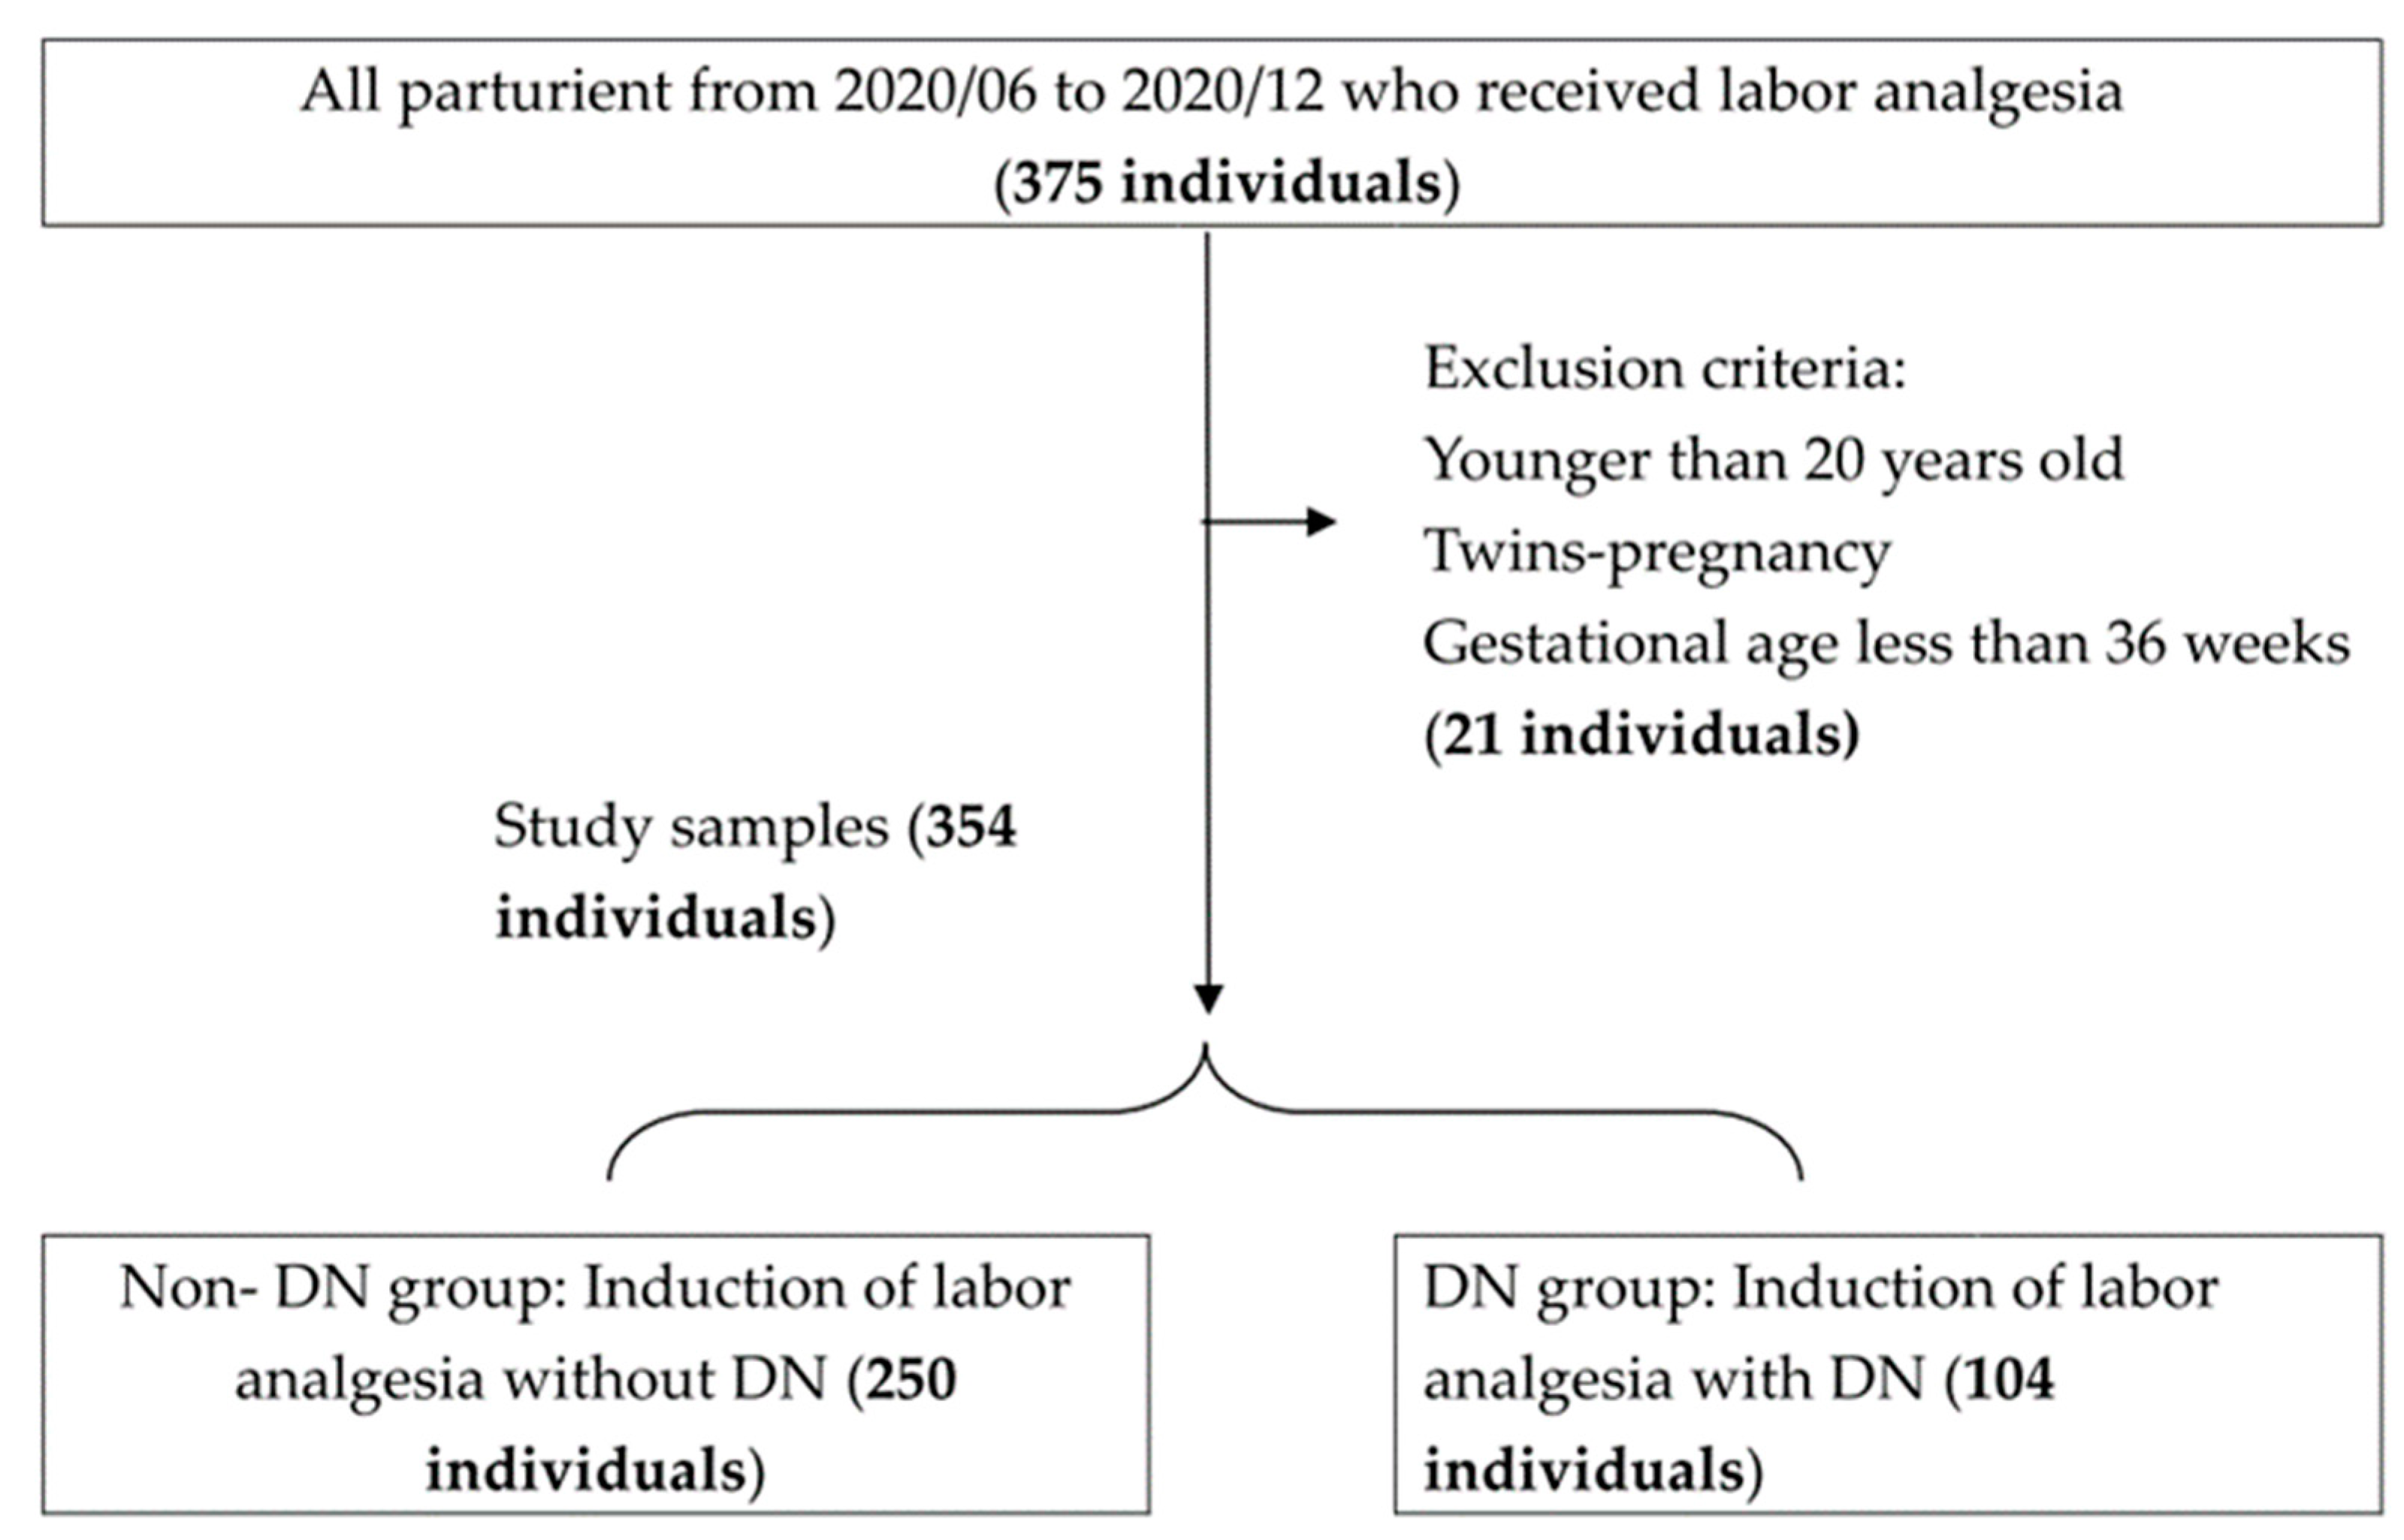 Association of epidural analgesia during labor and early